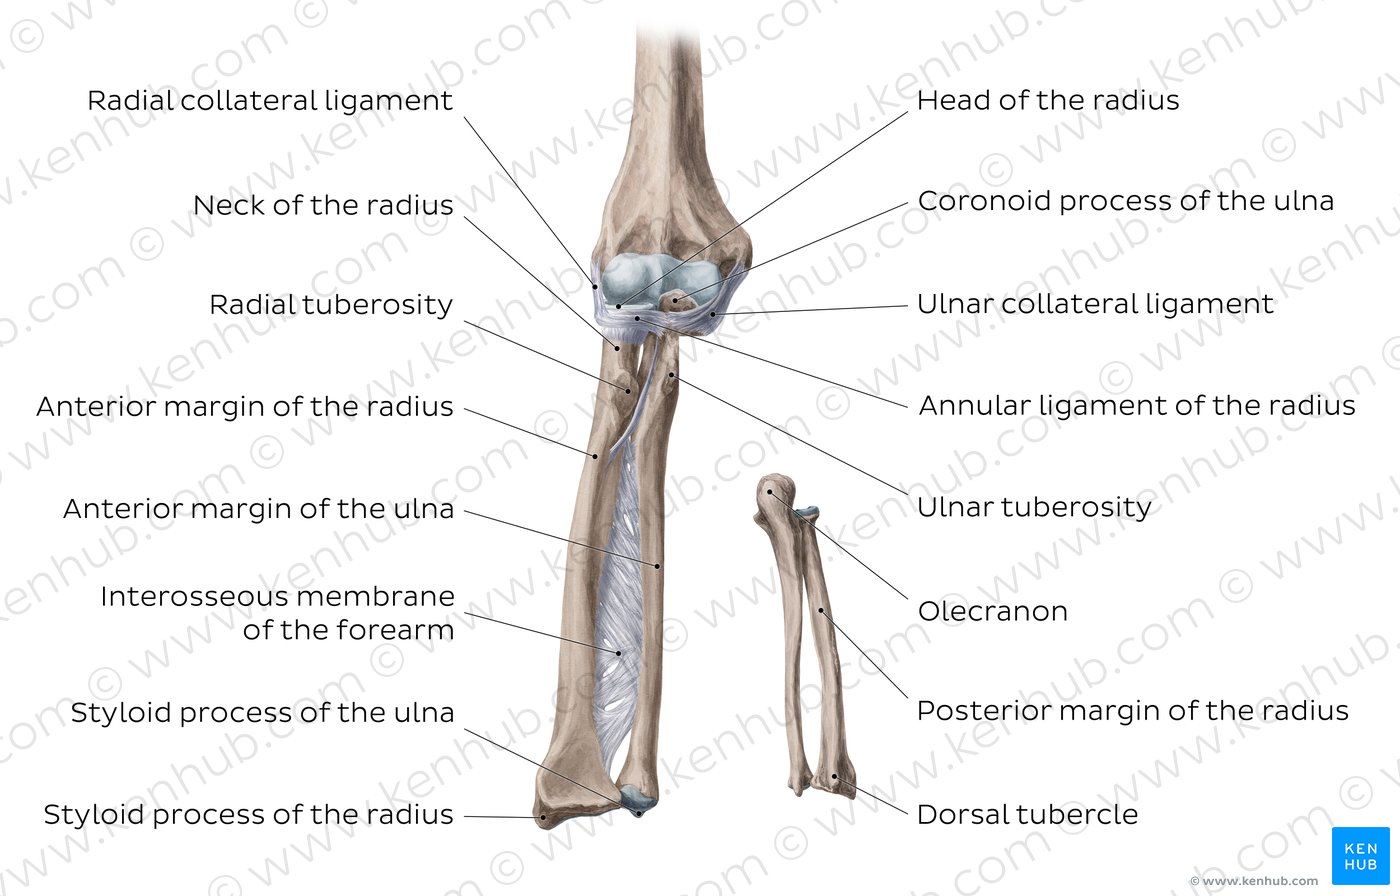 Ligaments of the elbow and forearm (overview)